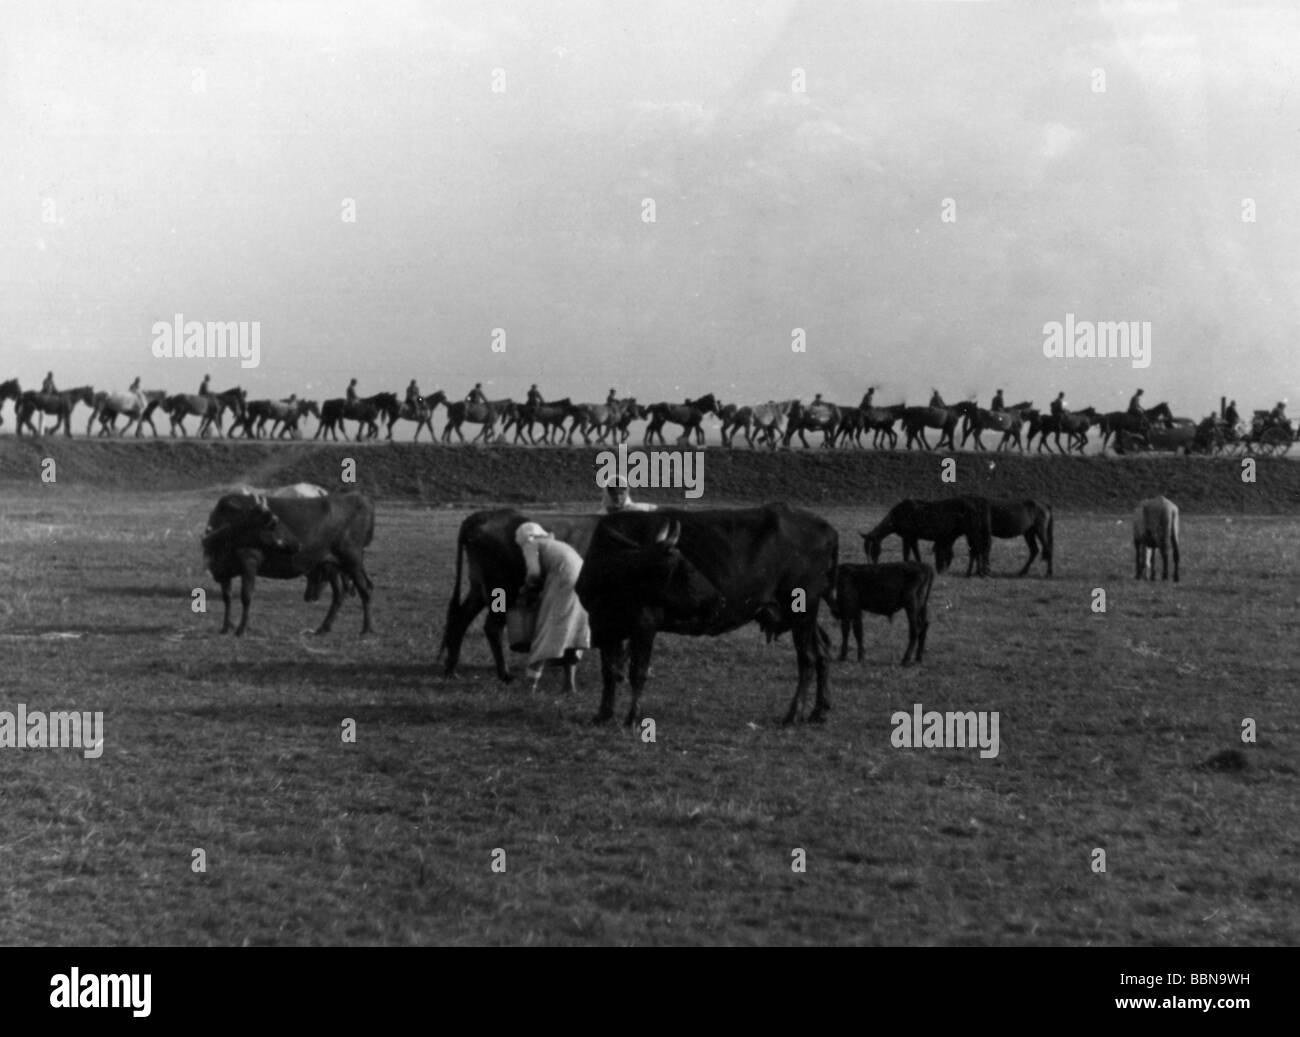 events, Second World War / WWII, Russia 1941, Russian female farmers with cows, in the background an advancing Wehrmacht column with horses, summer 1941, Stock Photo